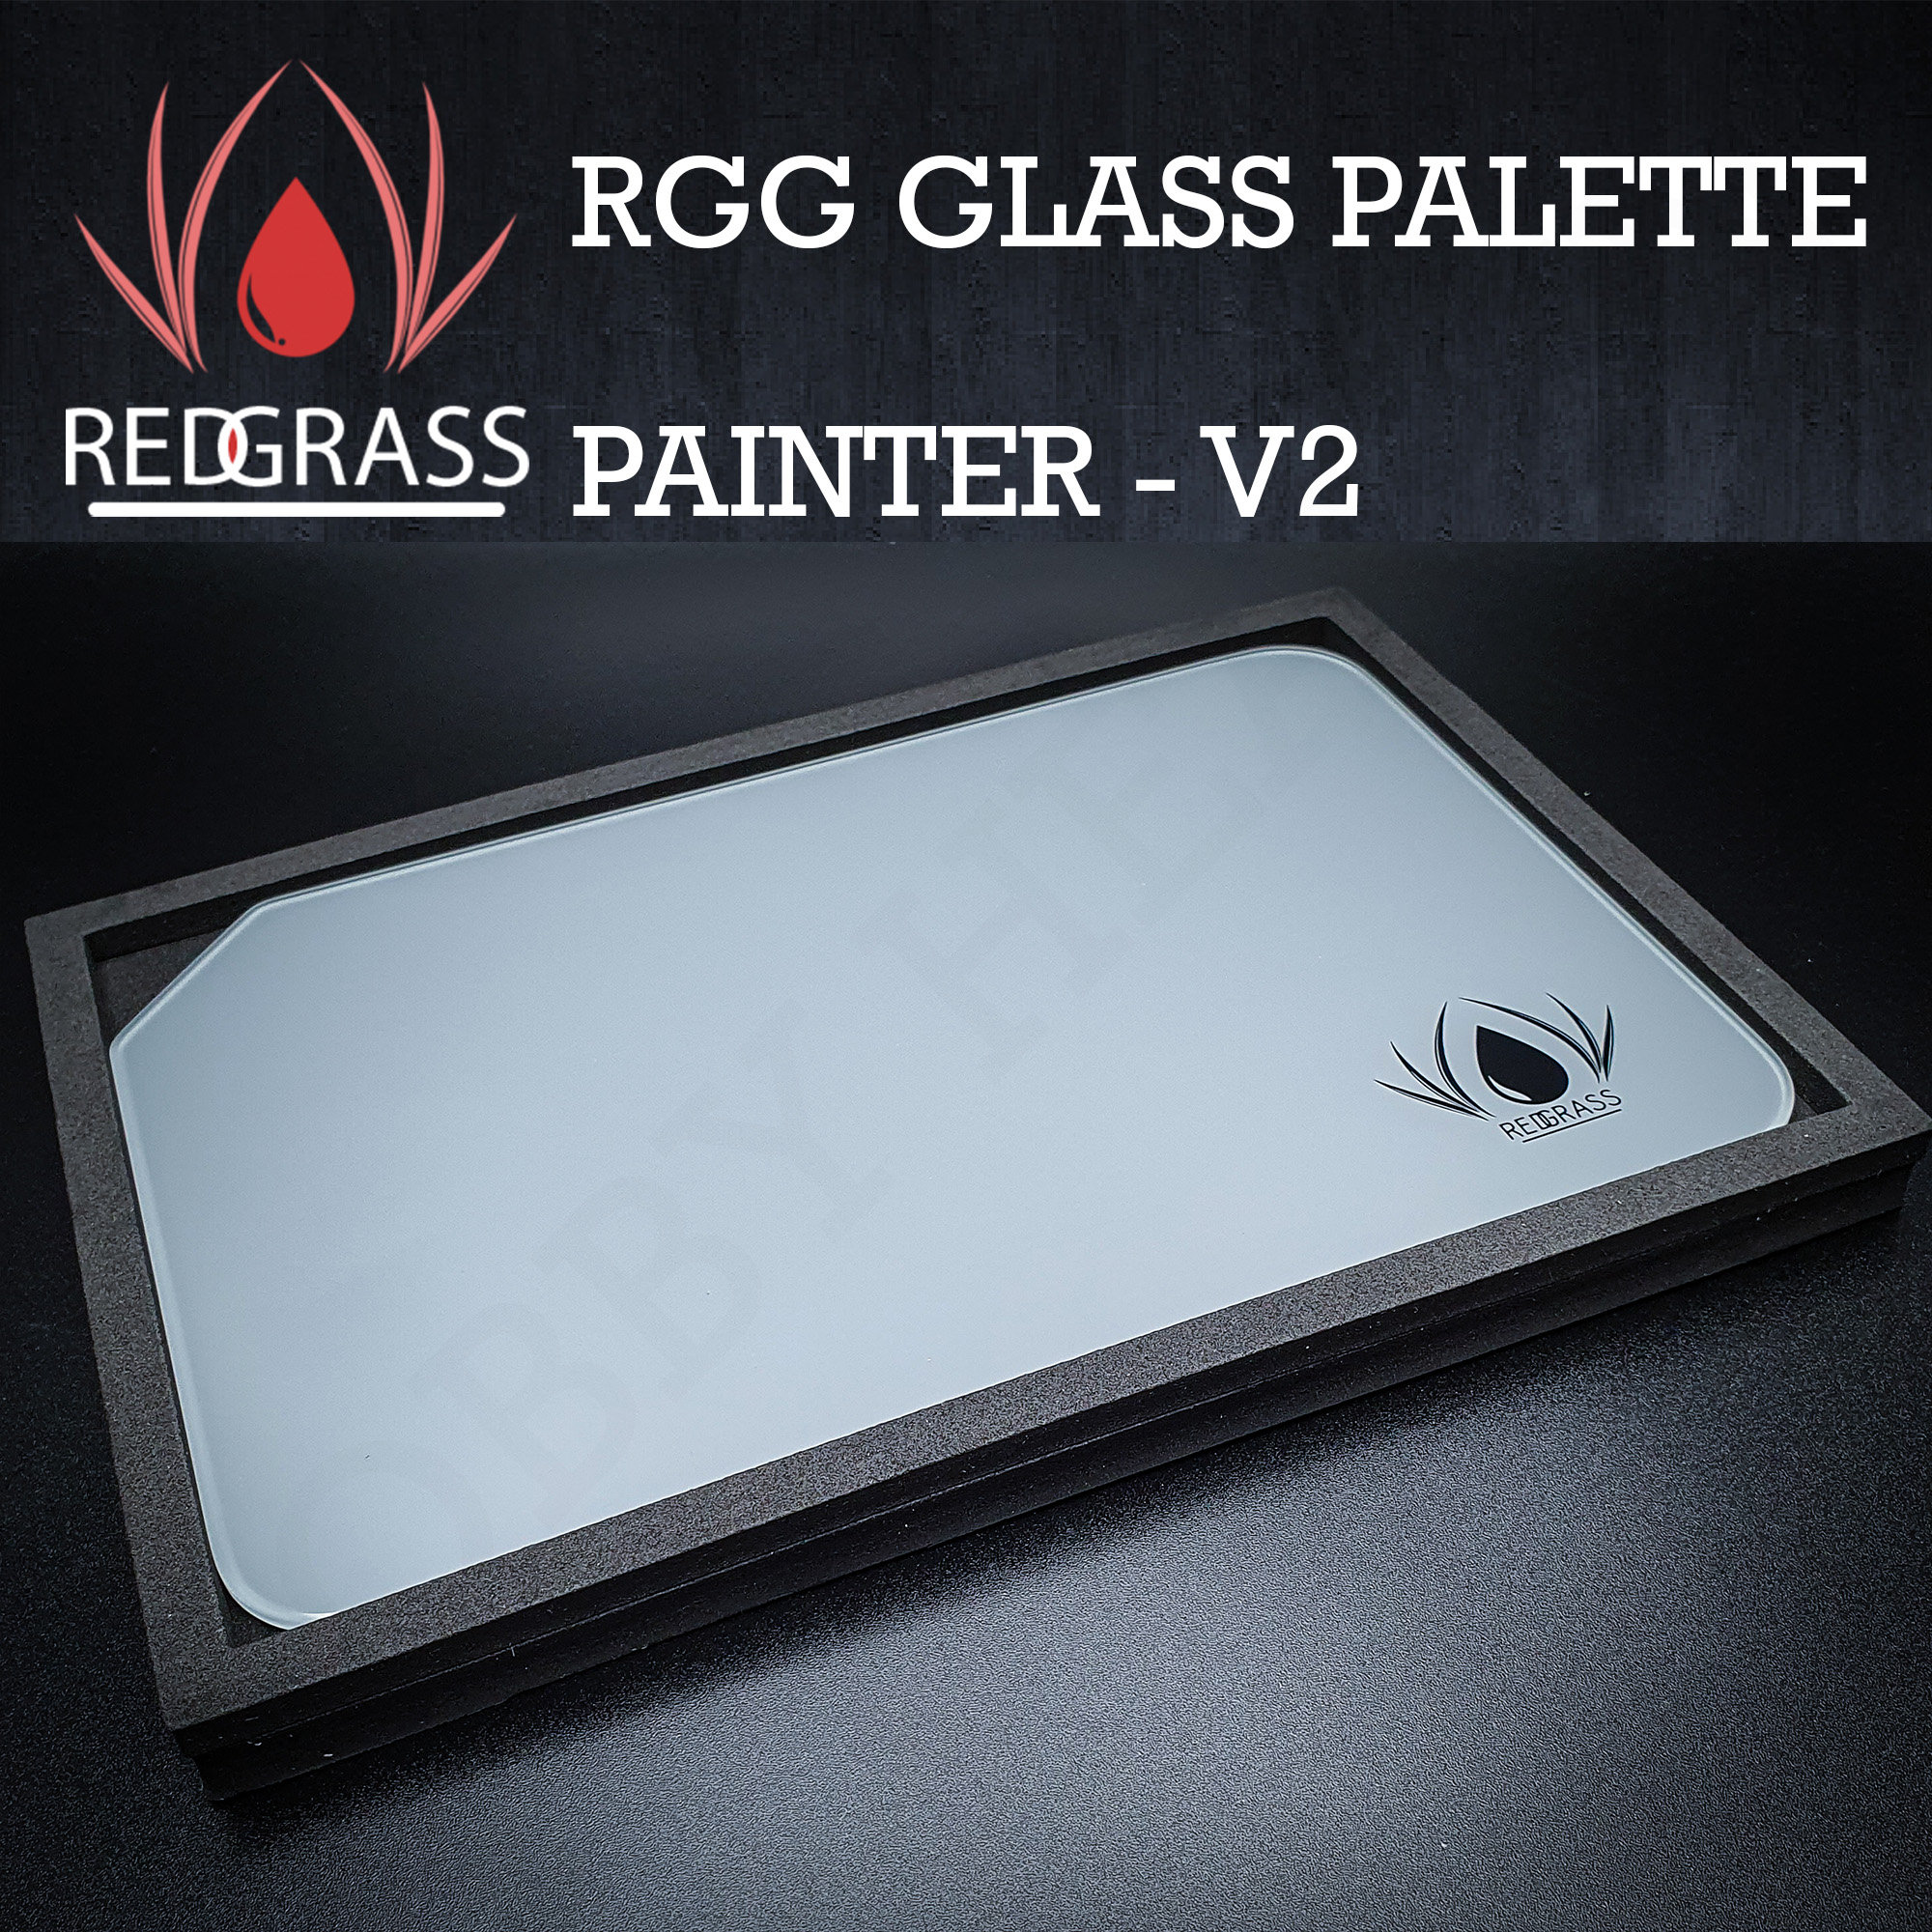 RGG Glass Palette Painter for Miniatures. Master oil painting